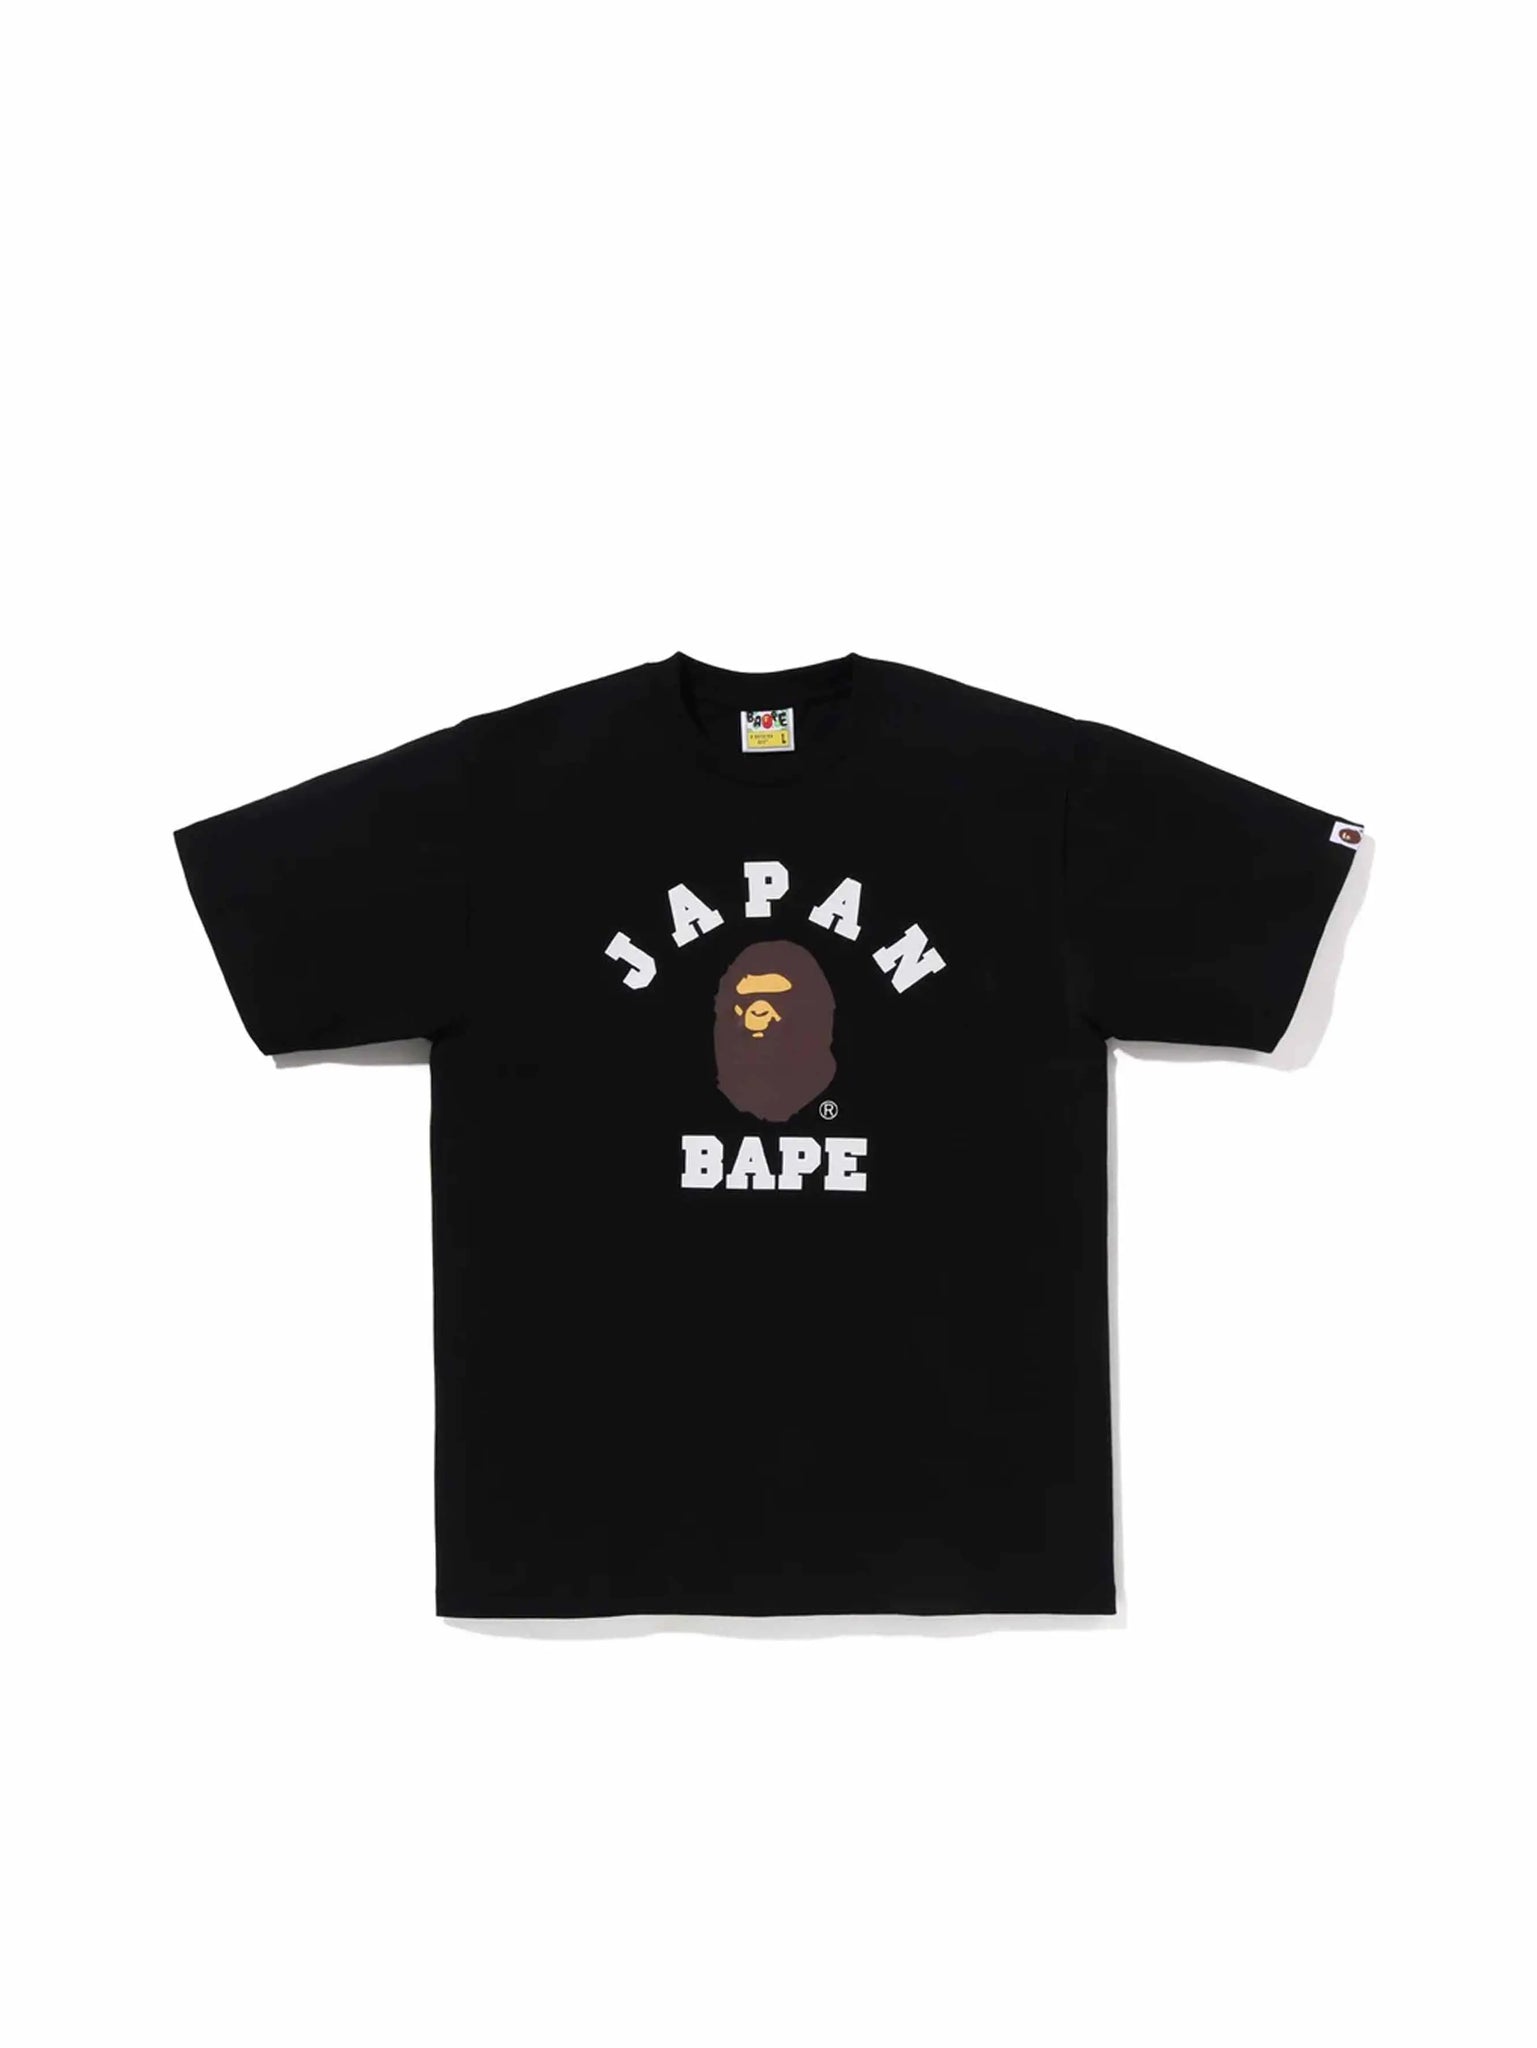 A Bathing Ape Japan College City Tee Black in Auckland, New Zealand - Shop name